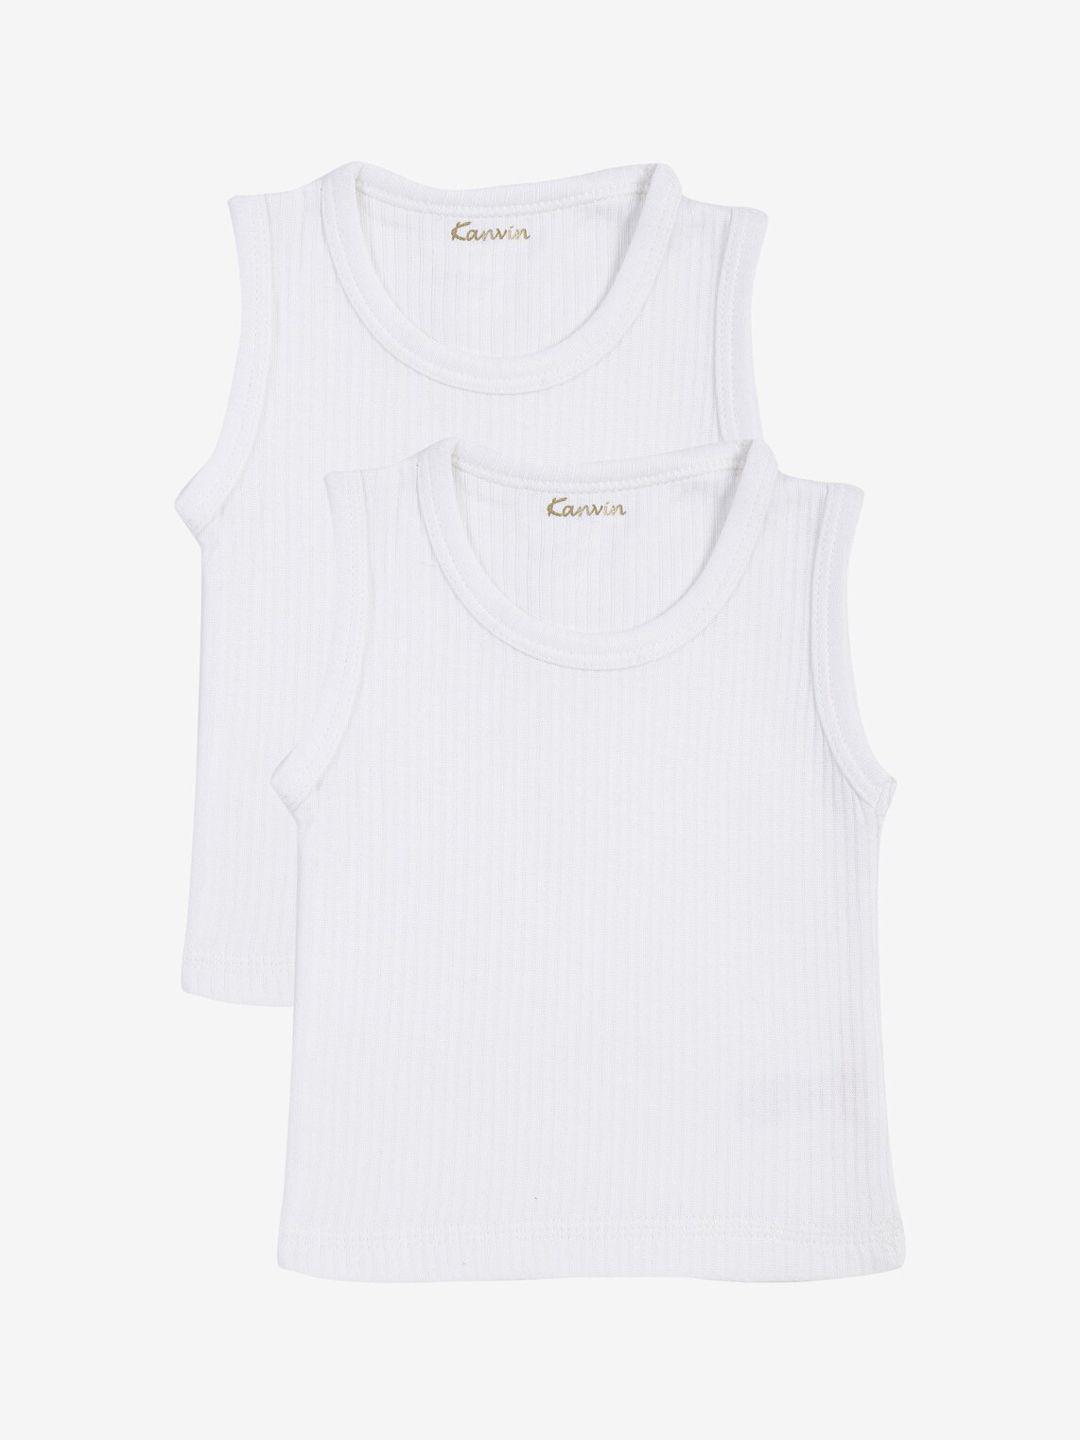 kanvin-boys-pack-of-2-white-ribbed-thermal-vests